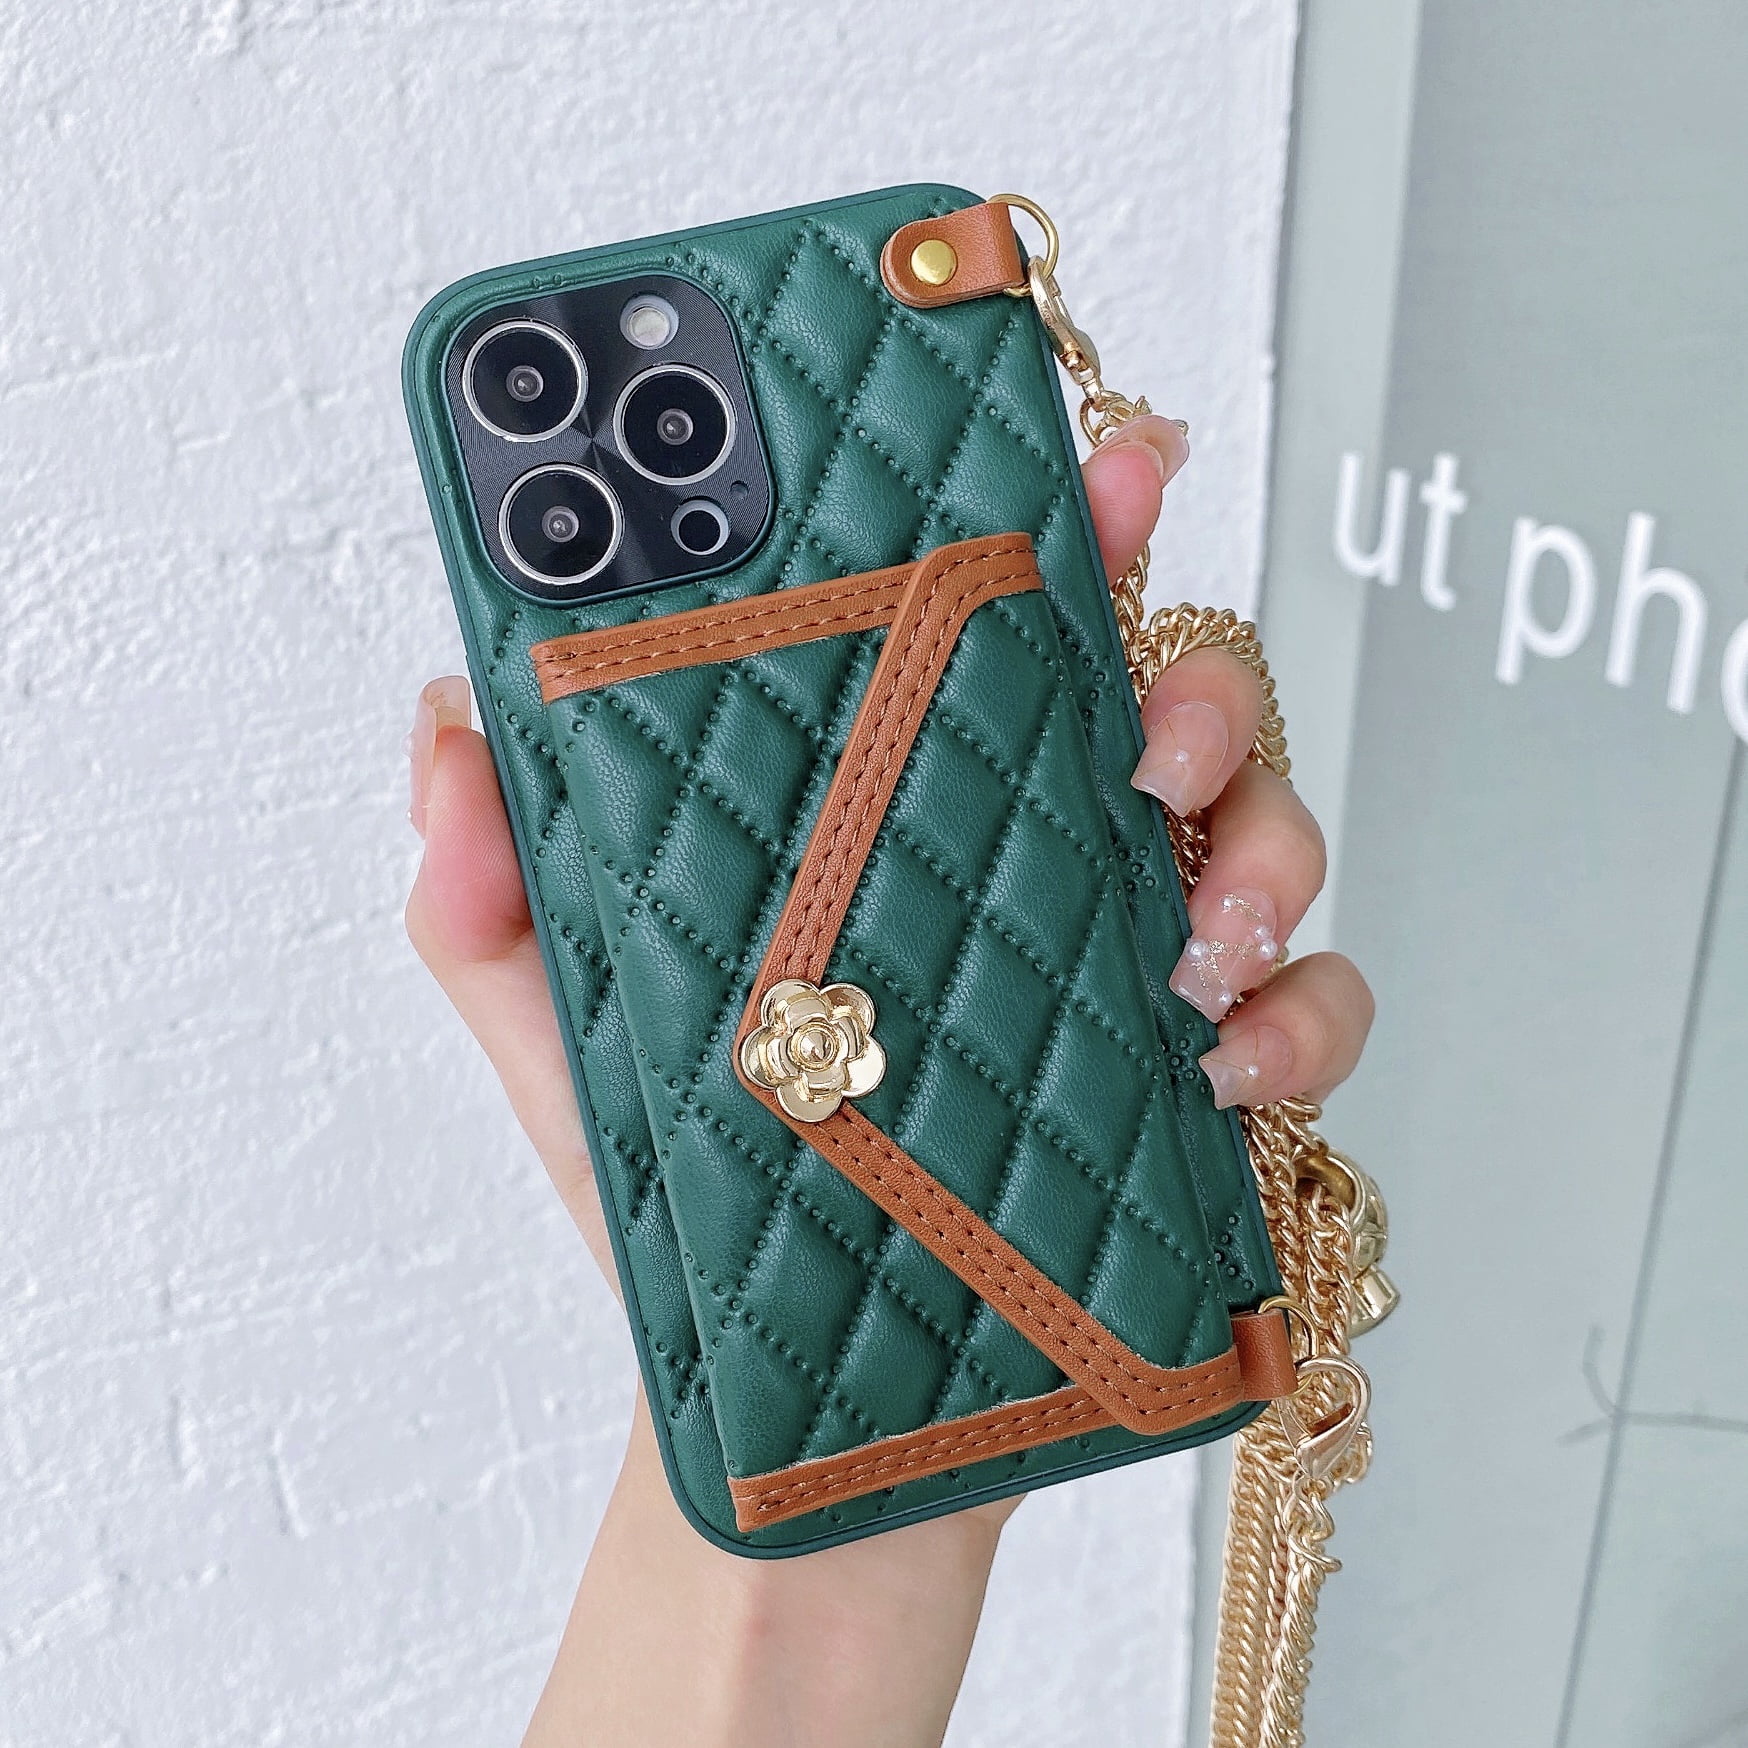 Allytech Wallet Case for iPhone XR,Crossbody Phone Case with Adjustable  Chain Shoulder Strap Cute Camellia Flip Folio Card Holder Girls Ladies  Handbag Case For iPhone XR,Green 